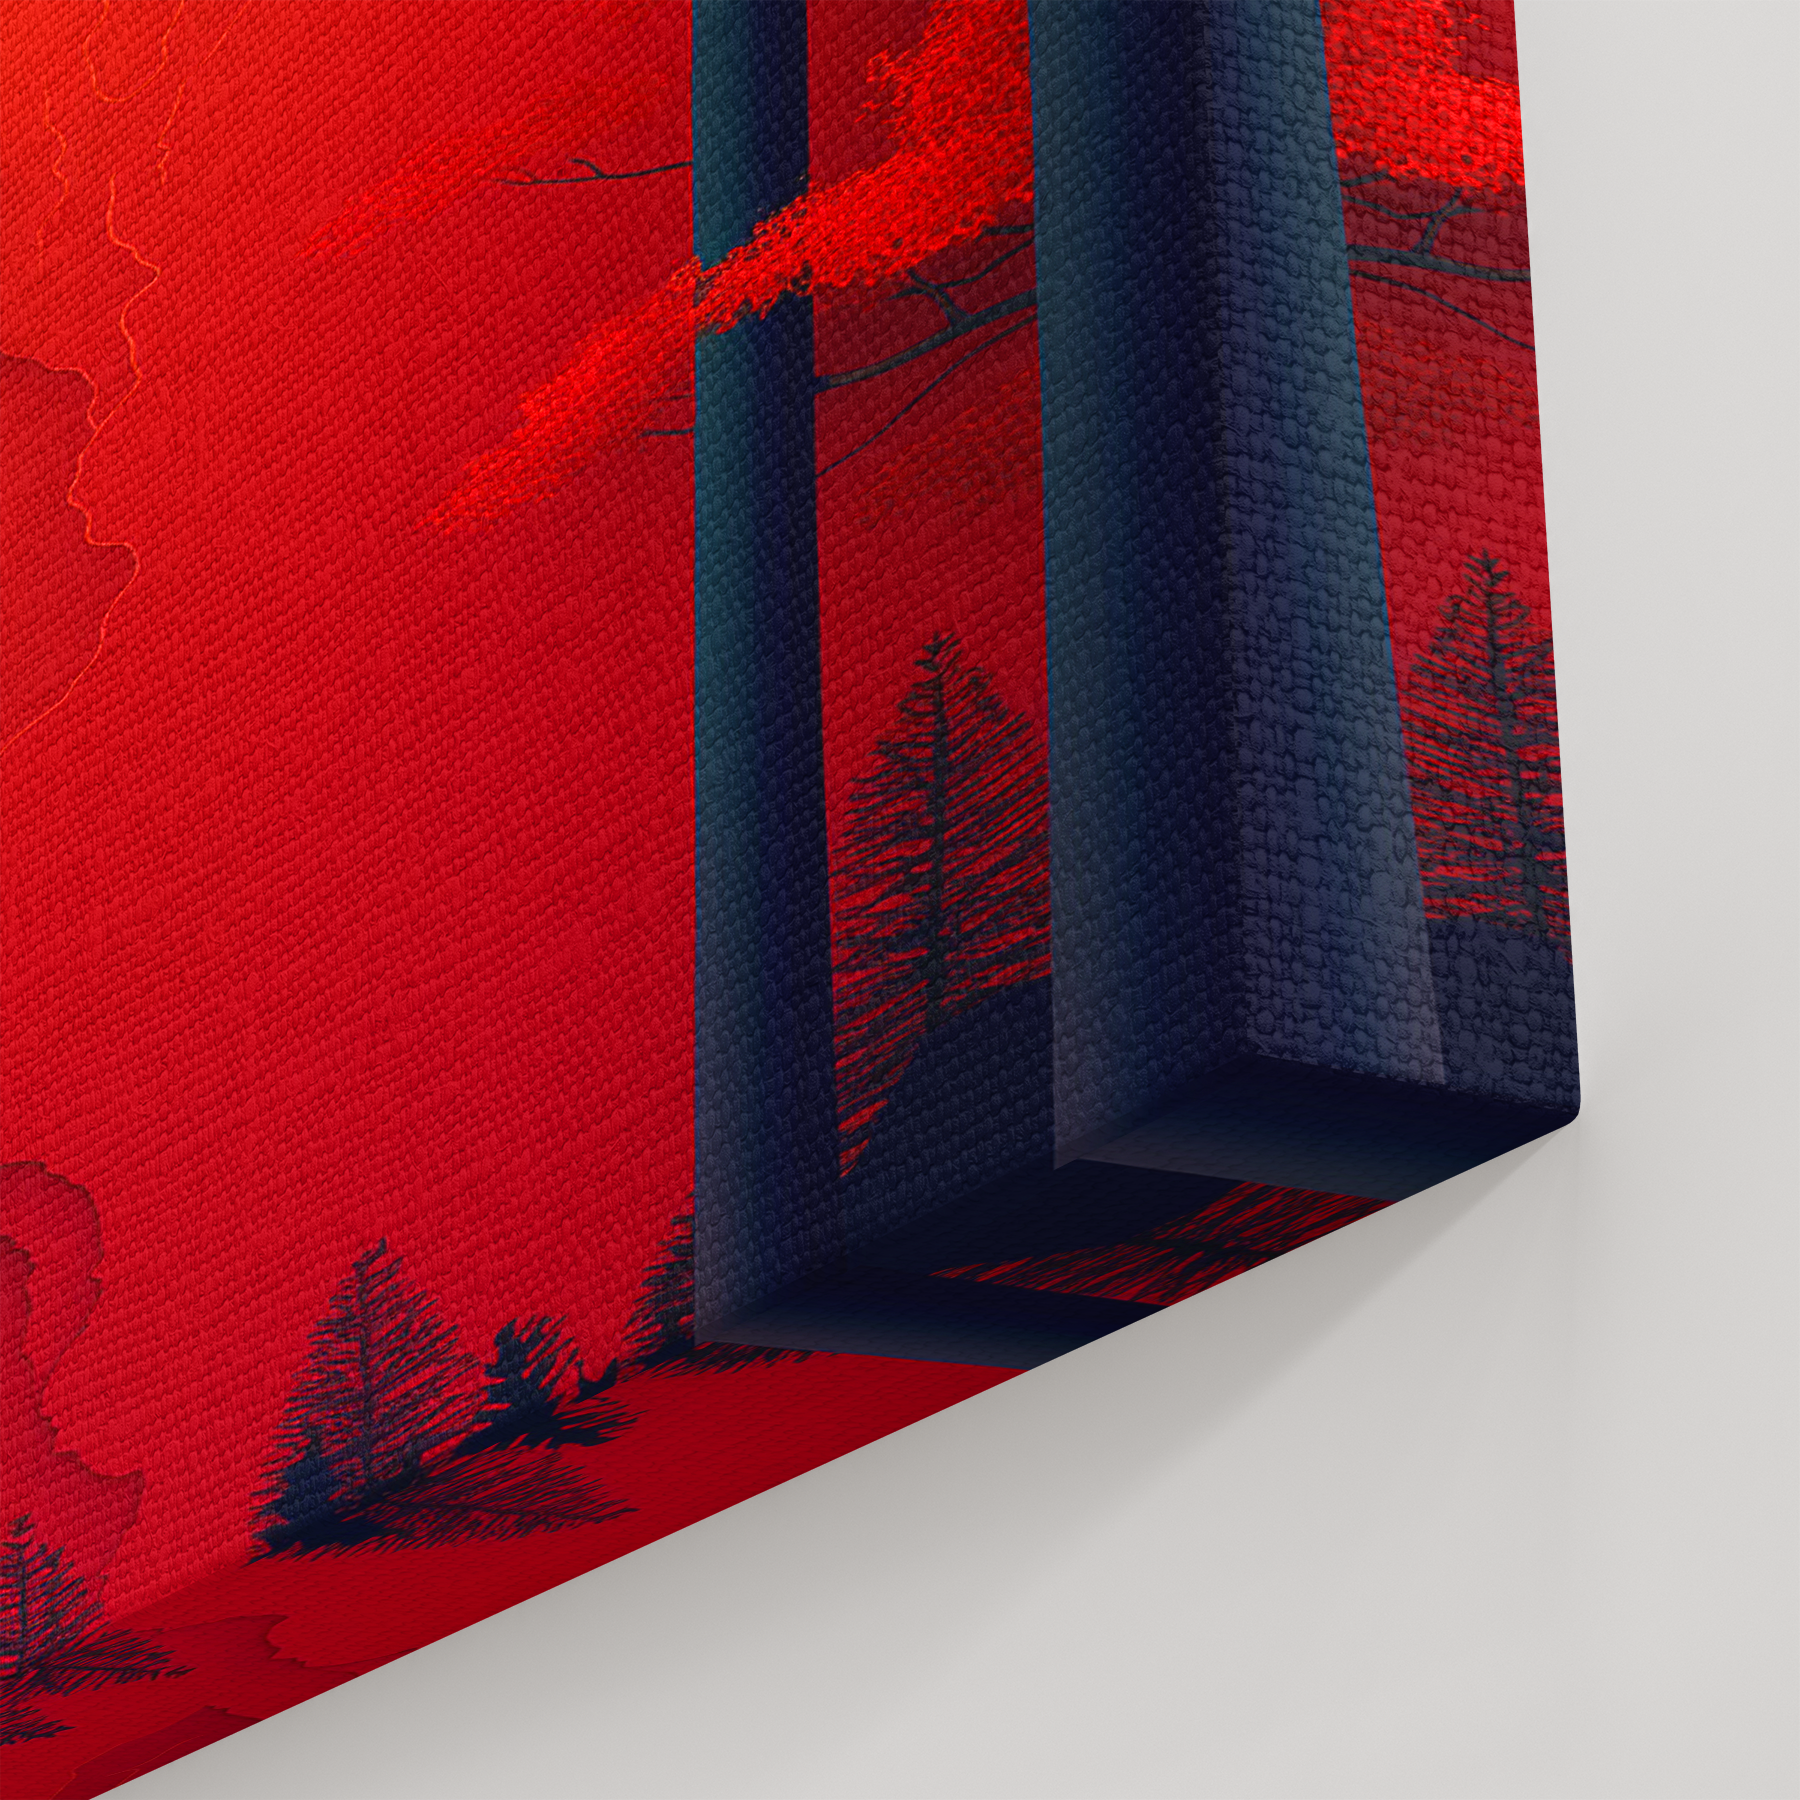 Red Leafy Cityscape (Canvas)Upgrade your tech with the latest gadgets. Shop now for innovative products designed to enhance your digital lifestyle. Fast shipping!RimaGallery